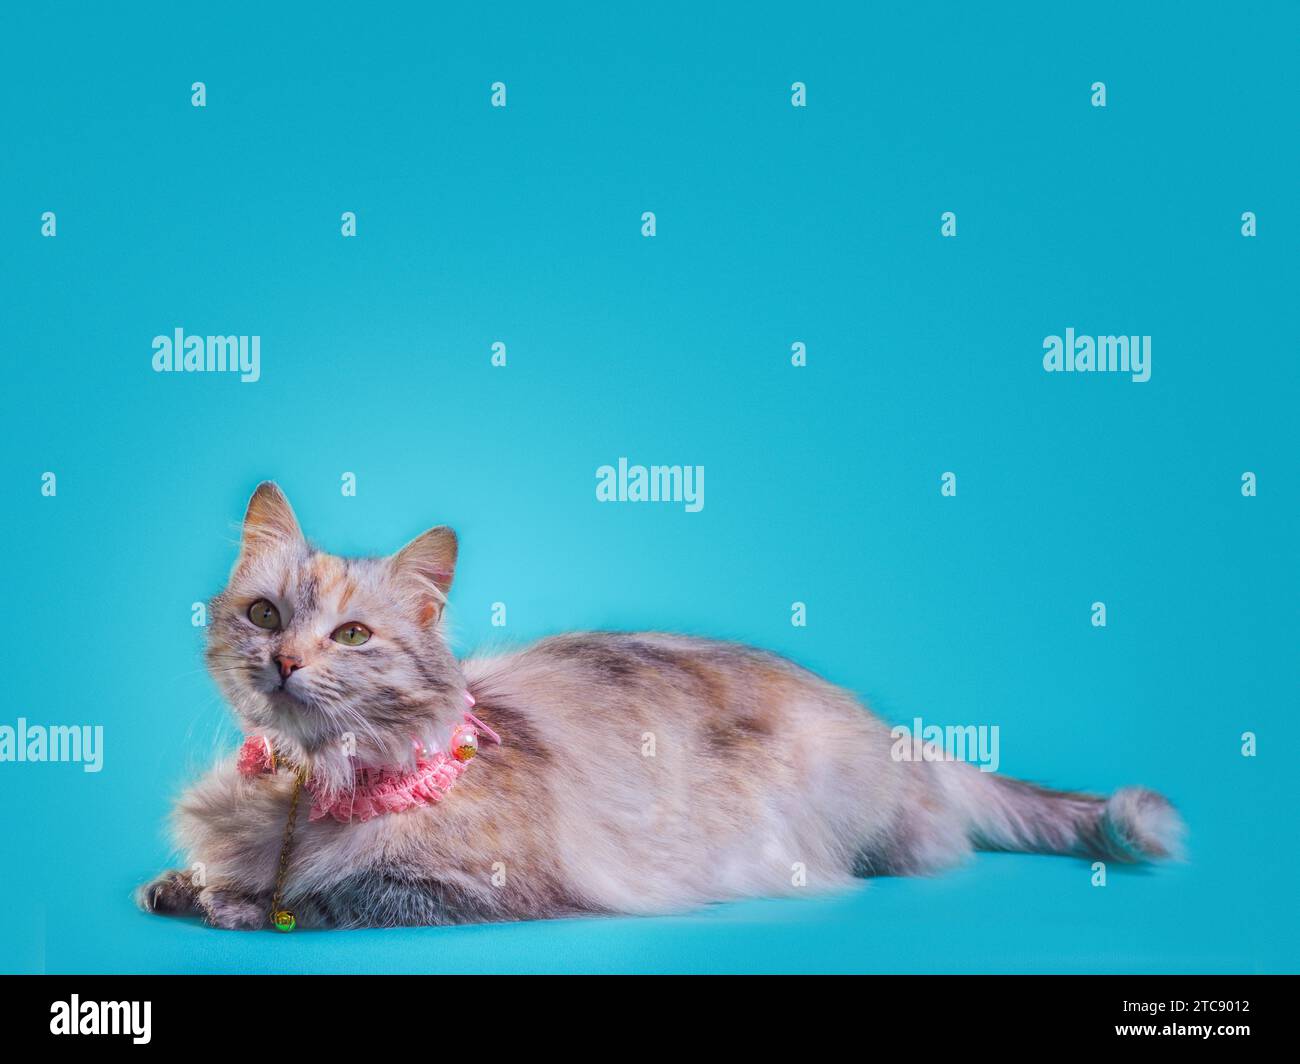 Ginger fluffy cat lays in a pink collar on a turquoise background Stock Photo